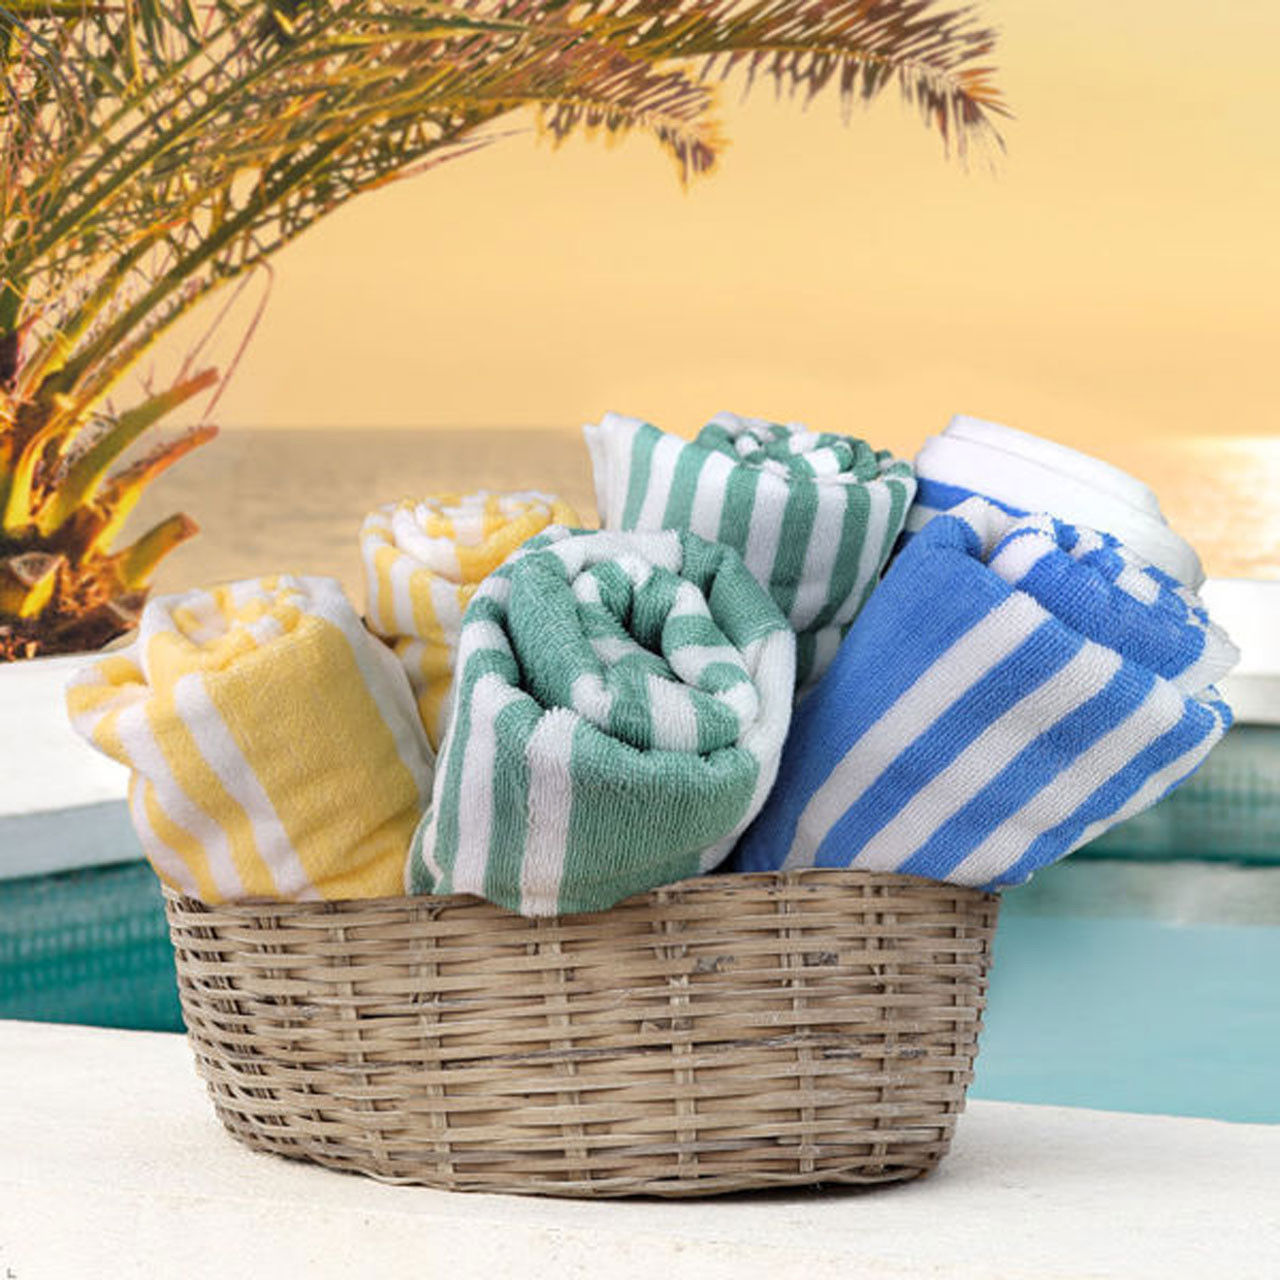 Are the Playa Cabana Stripe Bulk Beach Towels durable for long-lasting use?